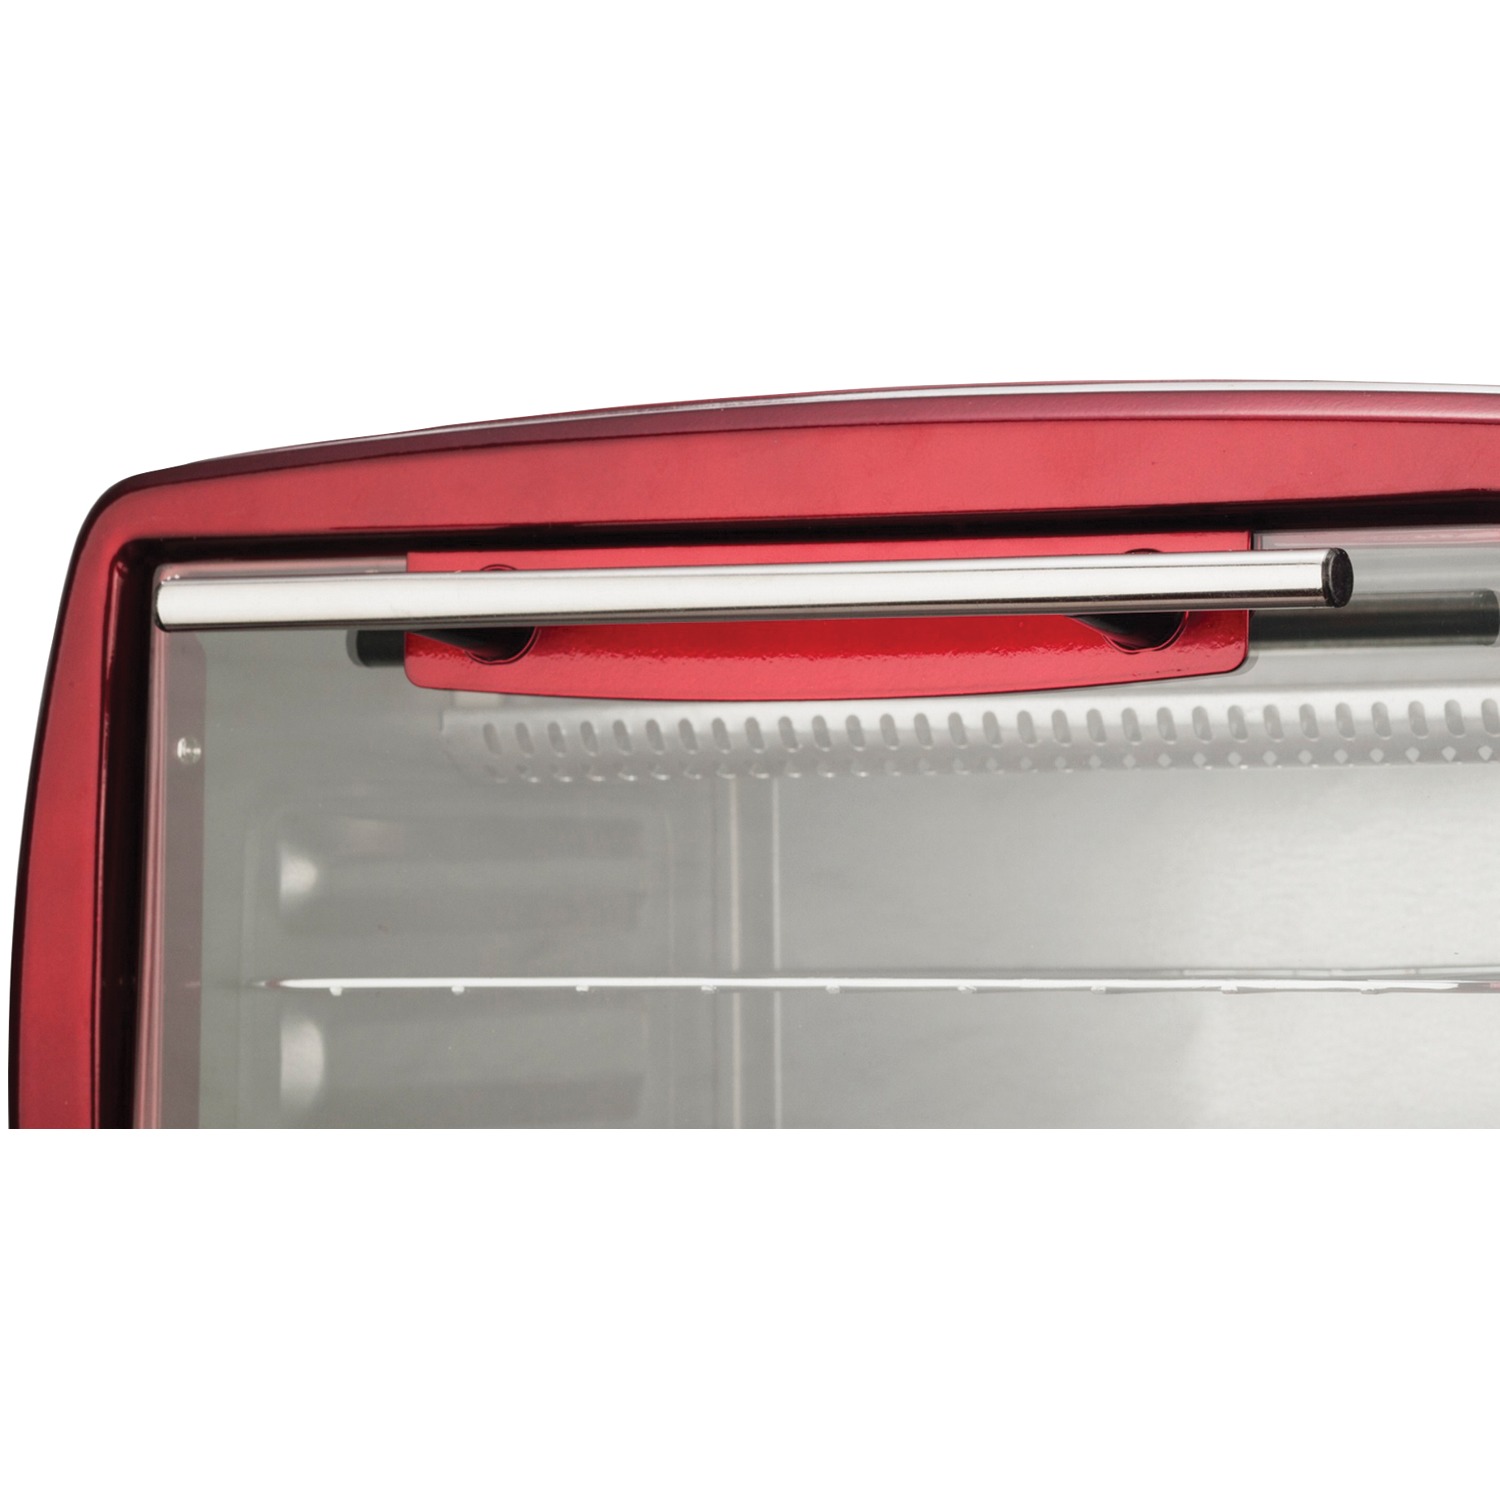 Brentwood Appliances TS-345R Stainless Steel 4 Slice Toaster Oven, Ruby Red - image 5 of 5